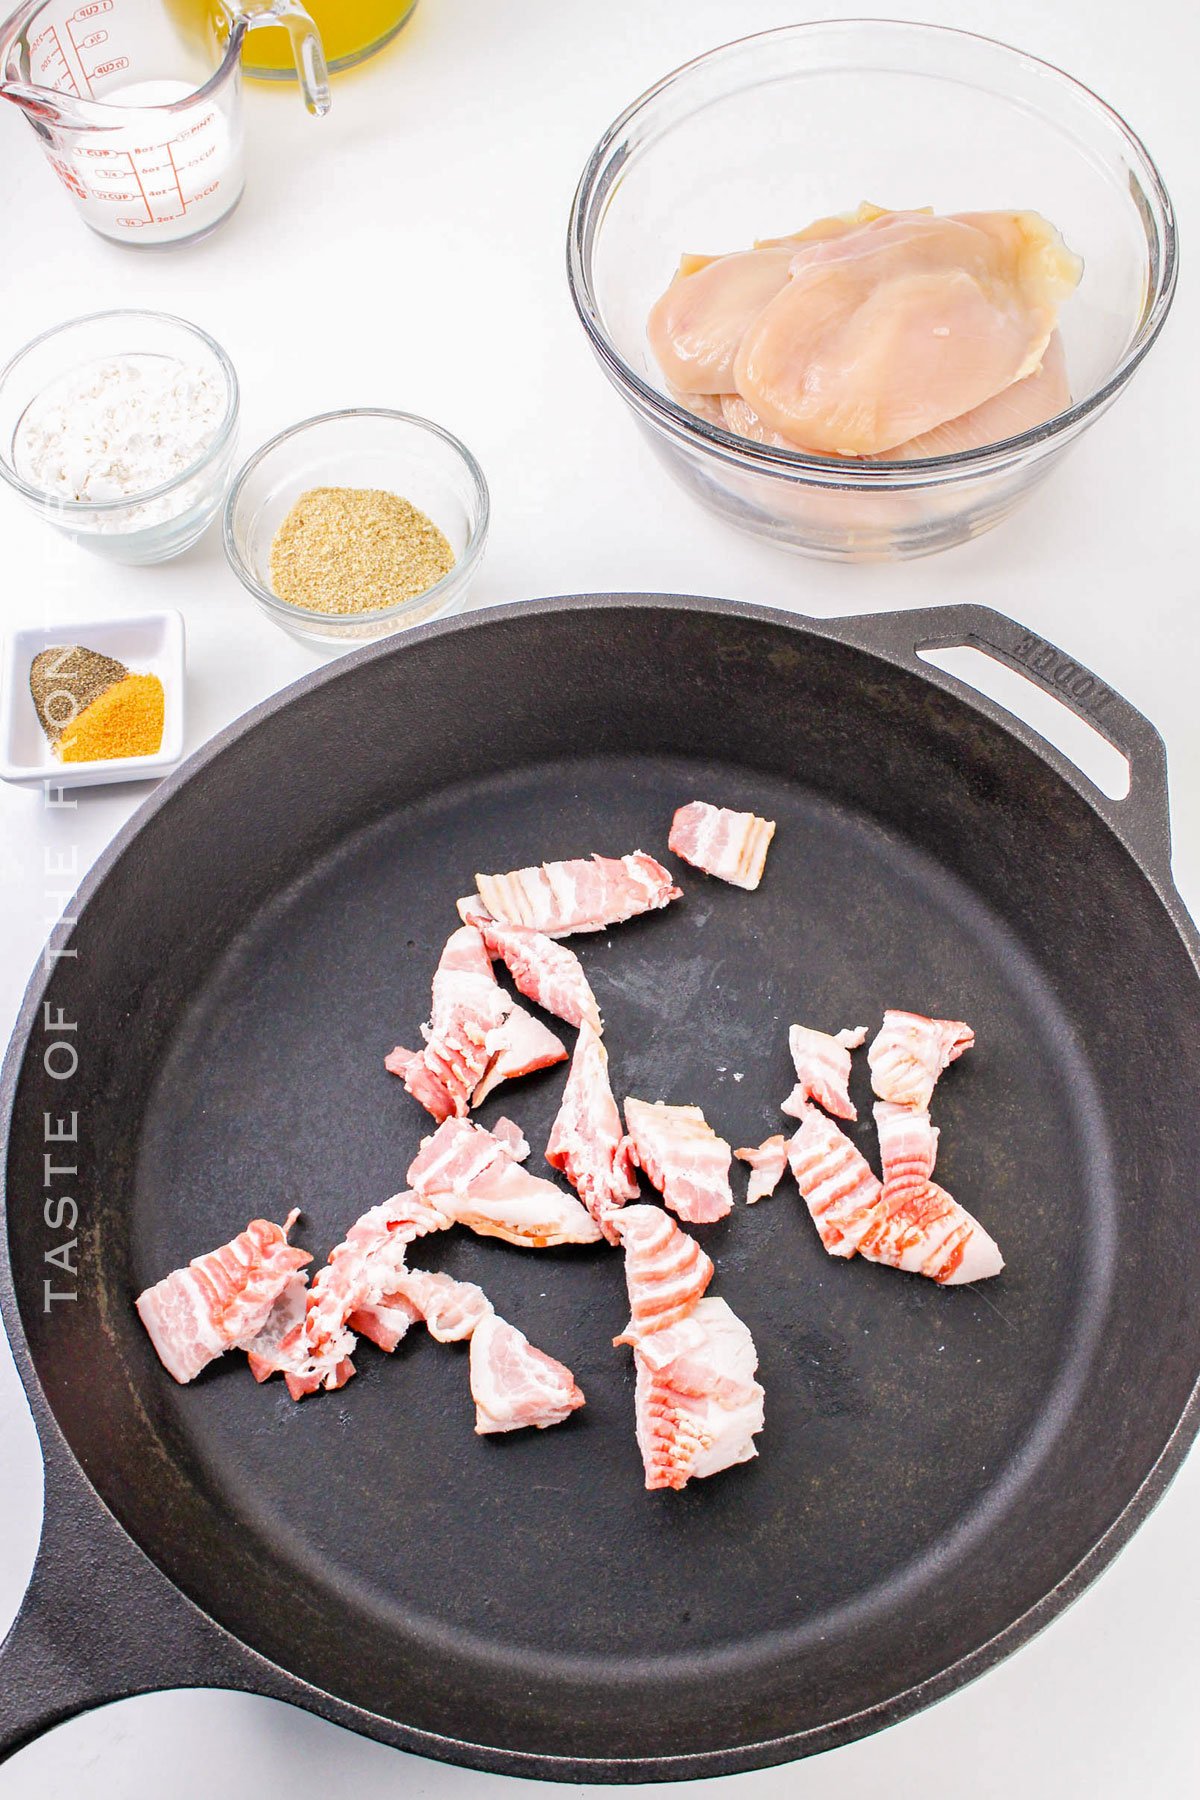 cooking the bacon pieces in the skillet